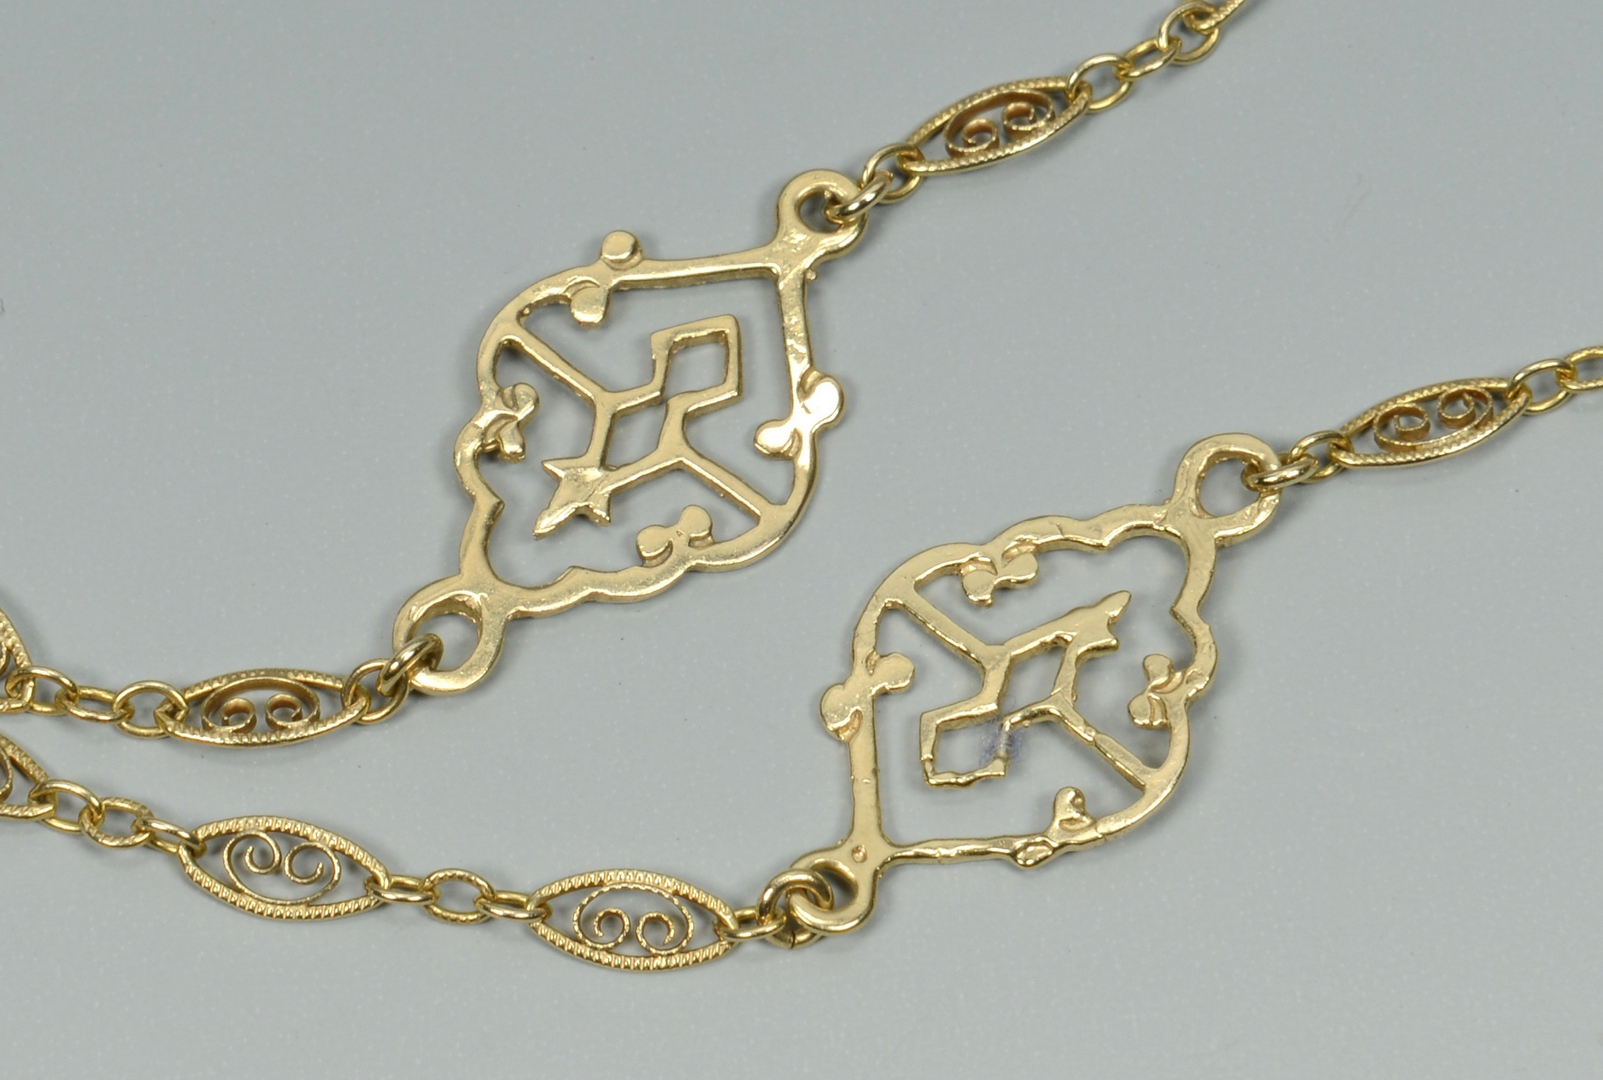 Lot 3088061: Two 14k Chain Necklaces